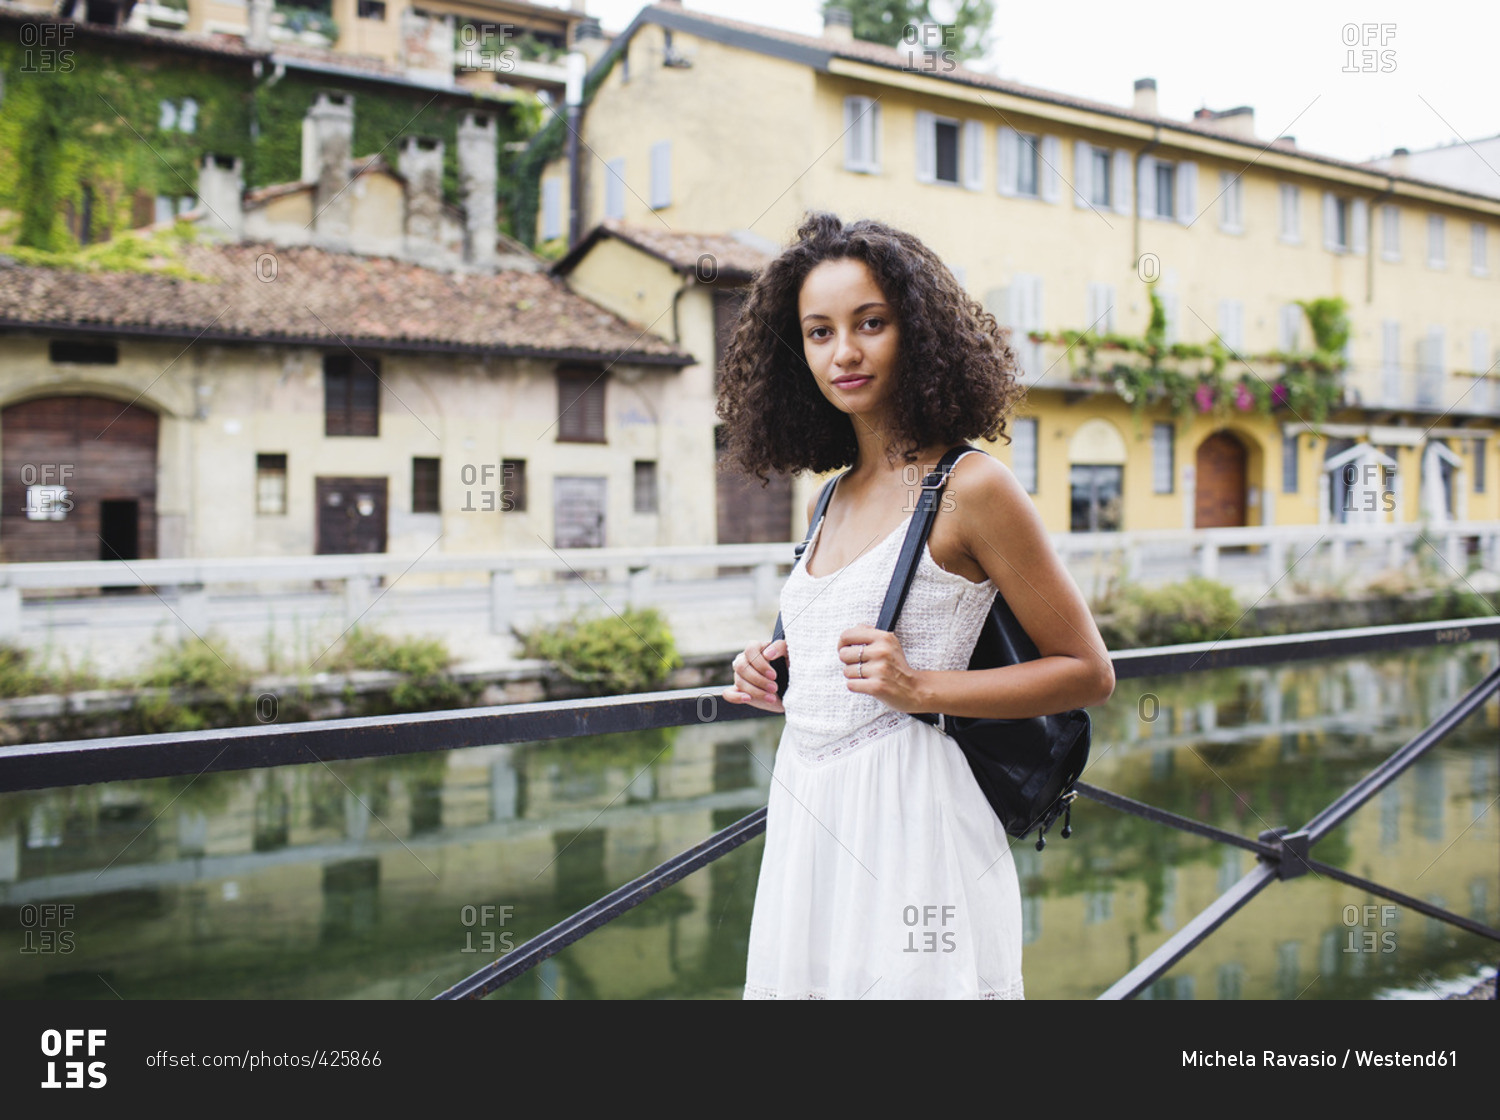 Italy- Milan- portrait of young woman with backpack wearing white summer dress